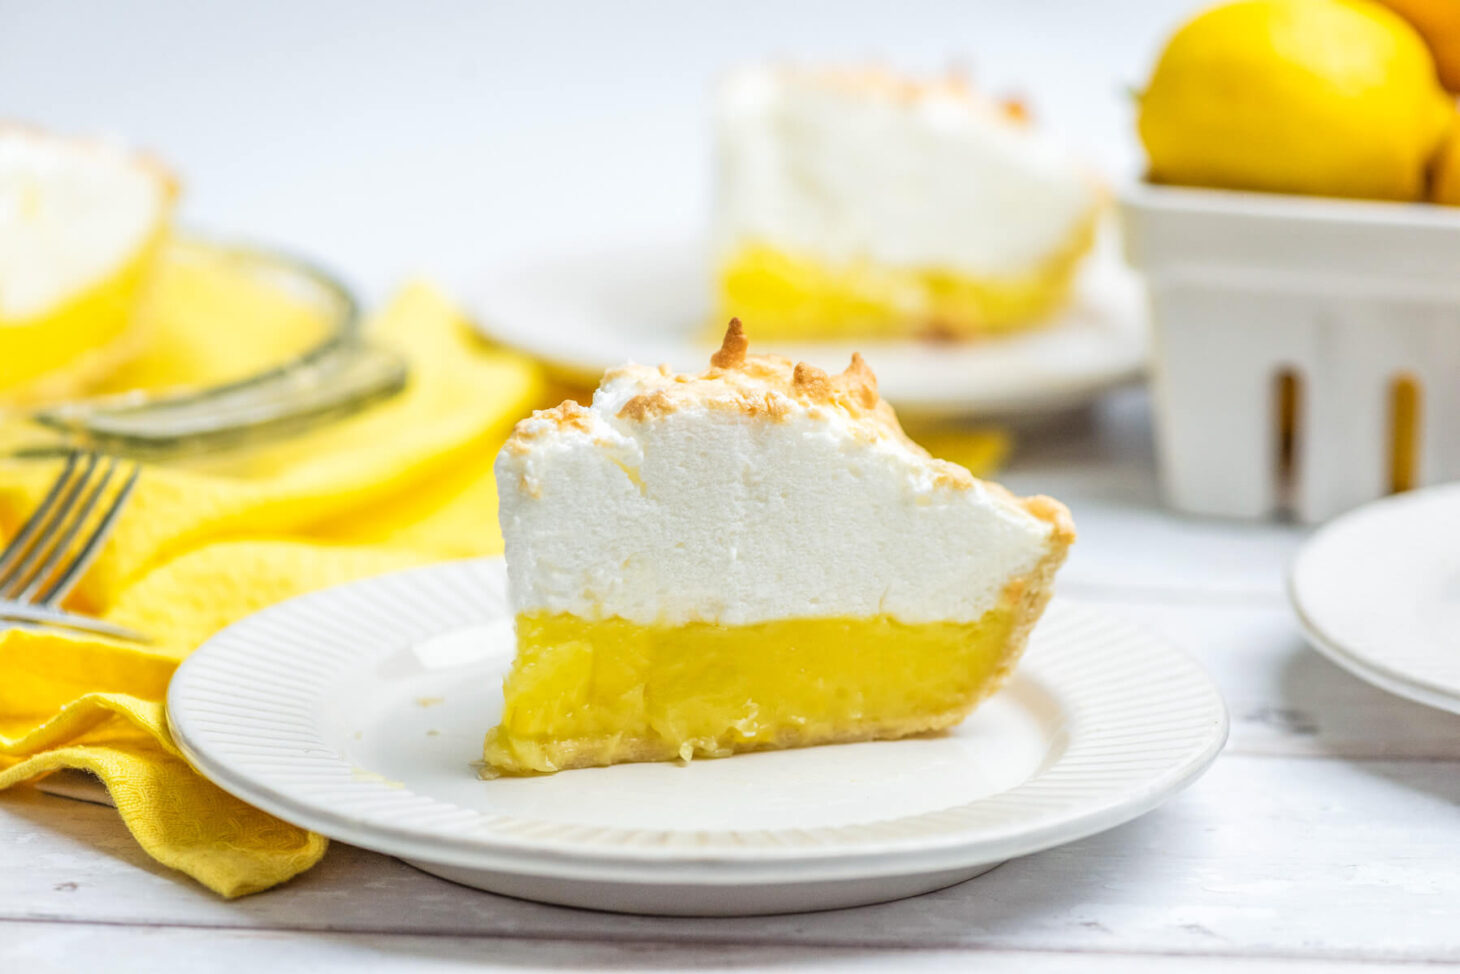 A slice of lemon meringue pie surrounded by lemons and a yellow napkin.